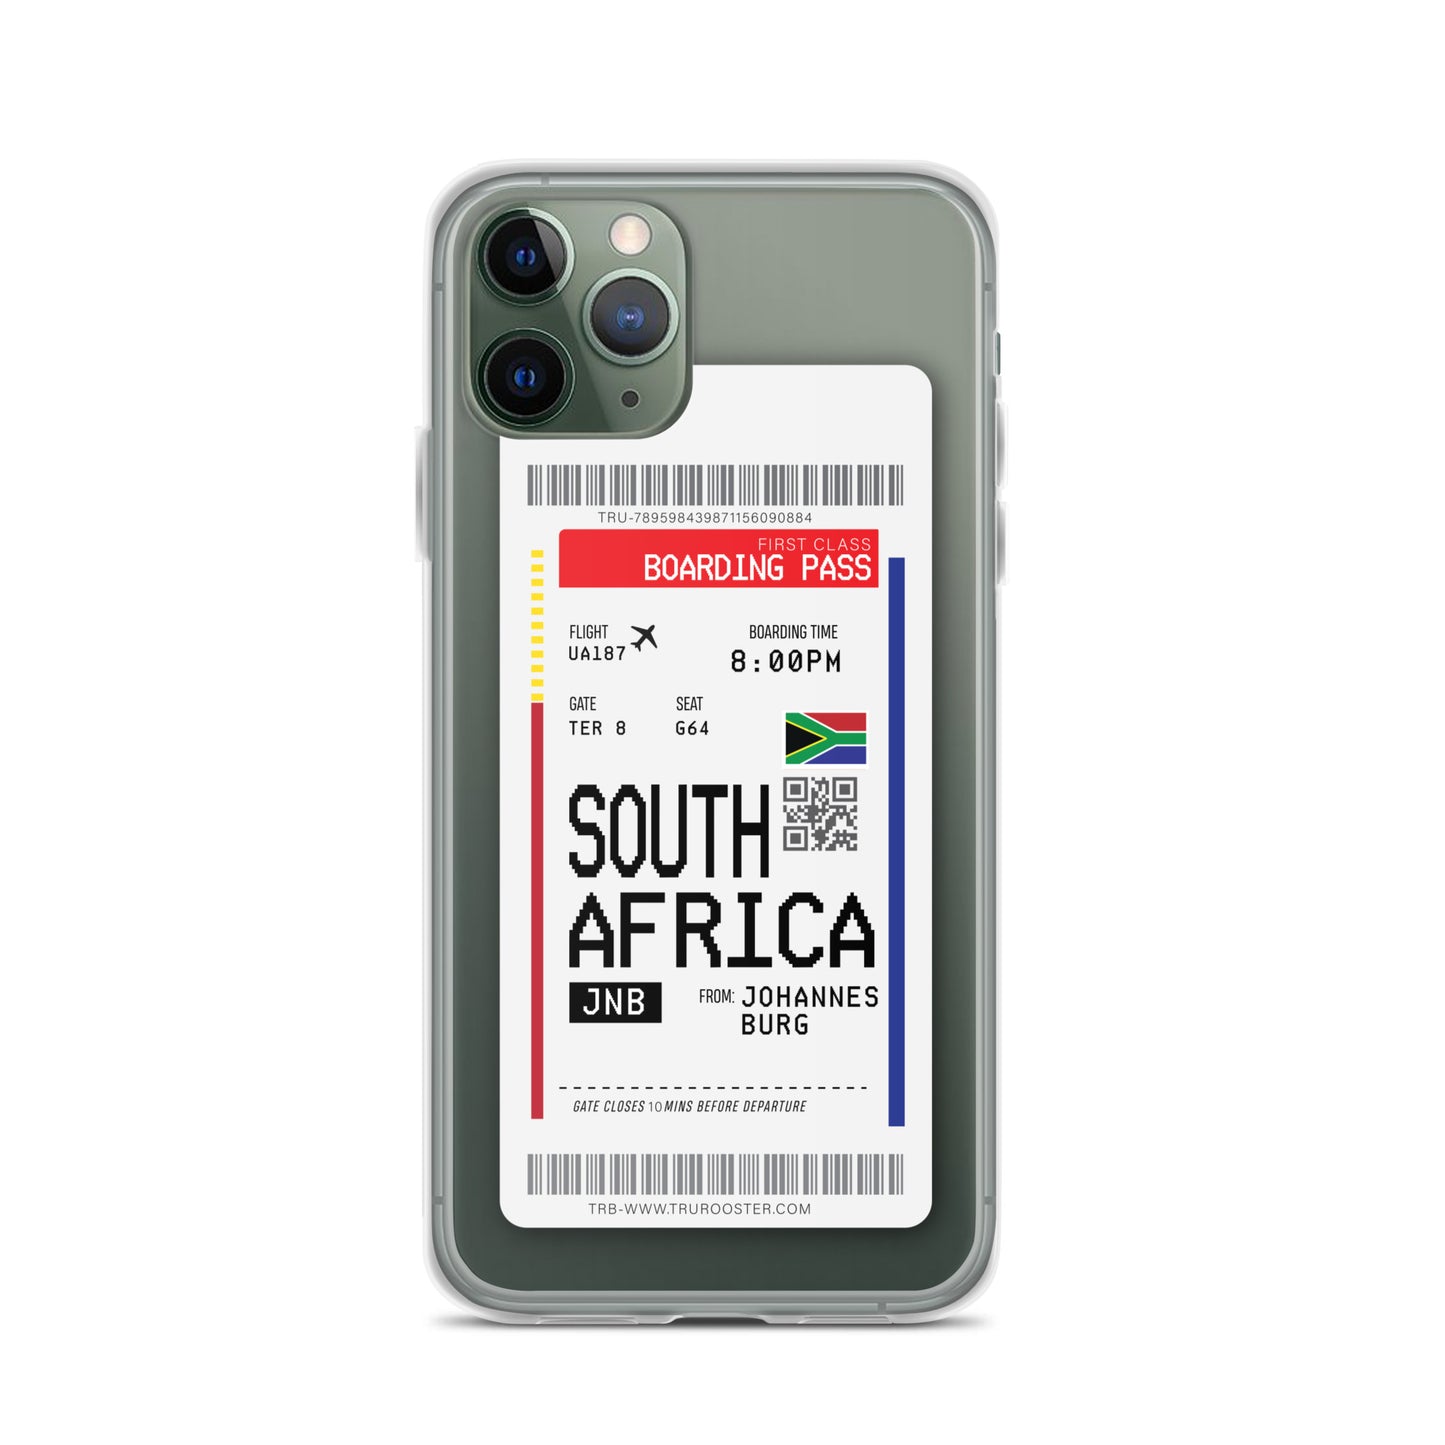 South Africa Transit Boarding pass iPhone Case